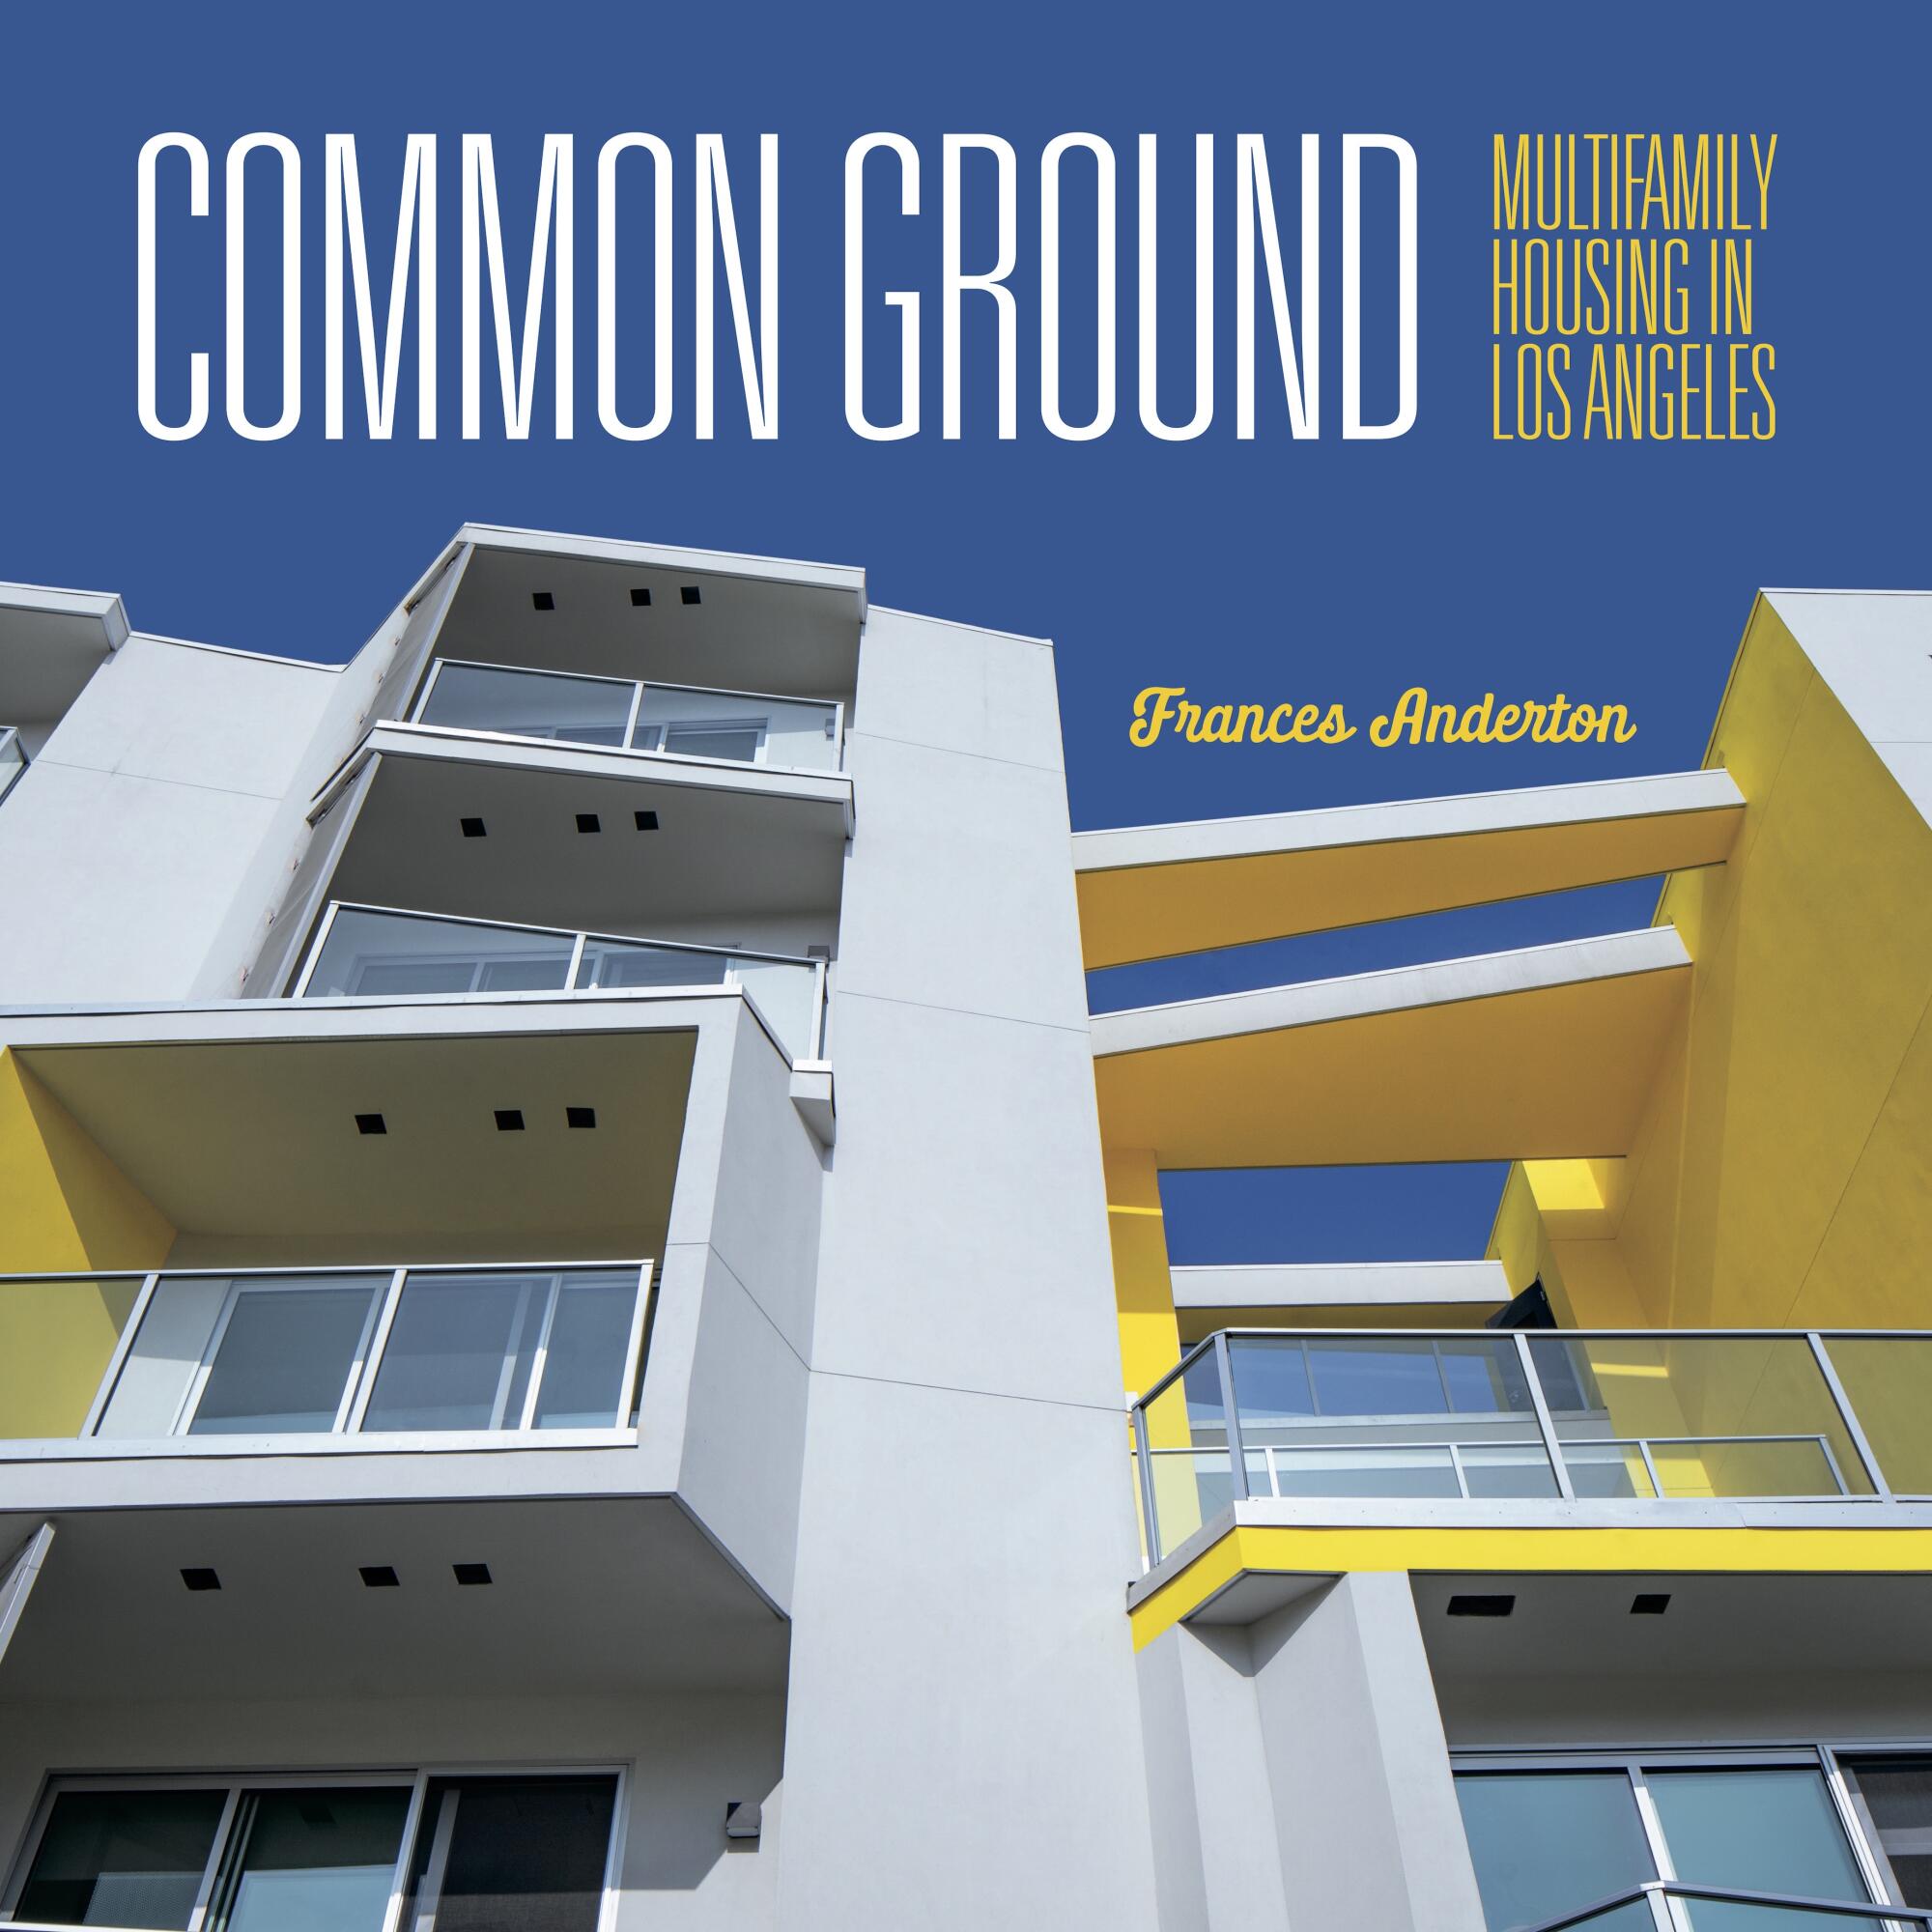 A book cover features a contemporary apartment house with bright yellow accents and the title "Common Ground."